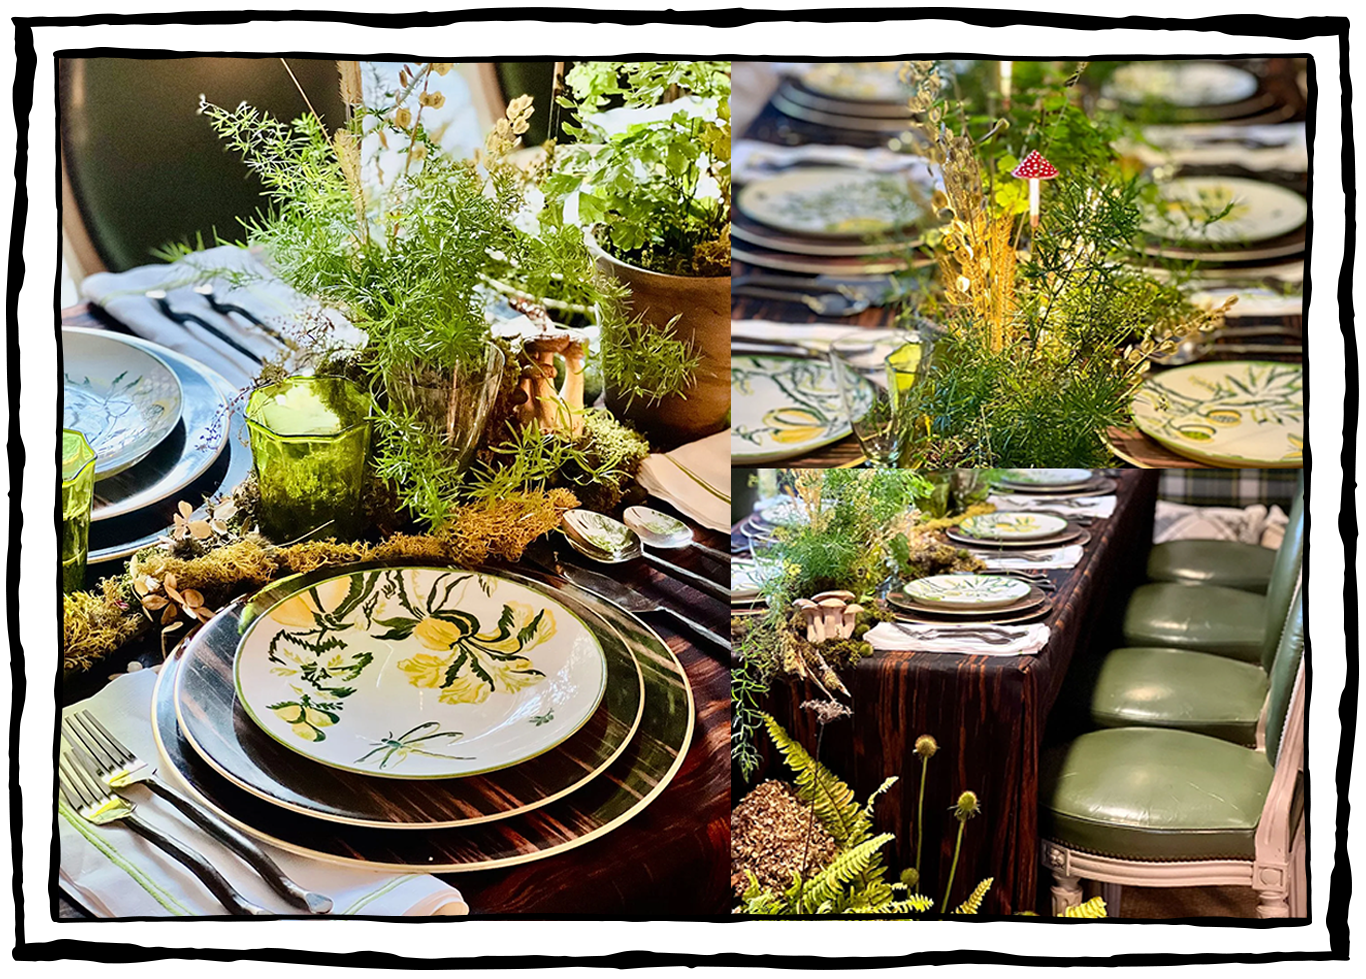 Mossy Tablescape